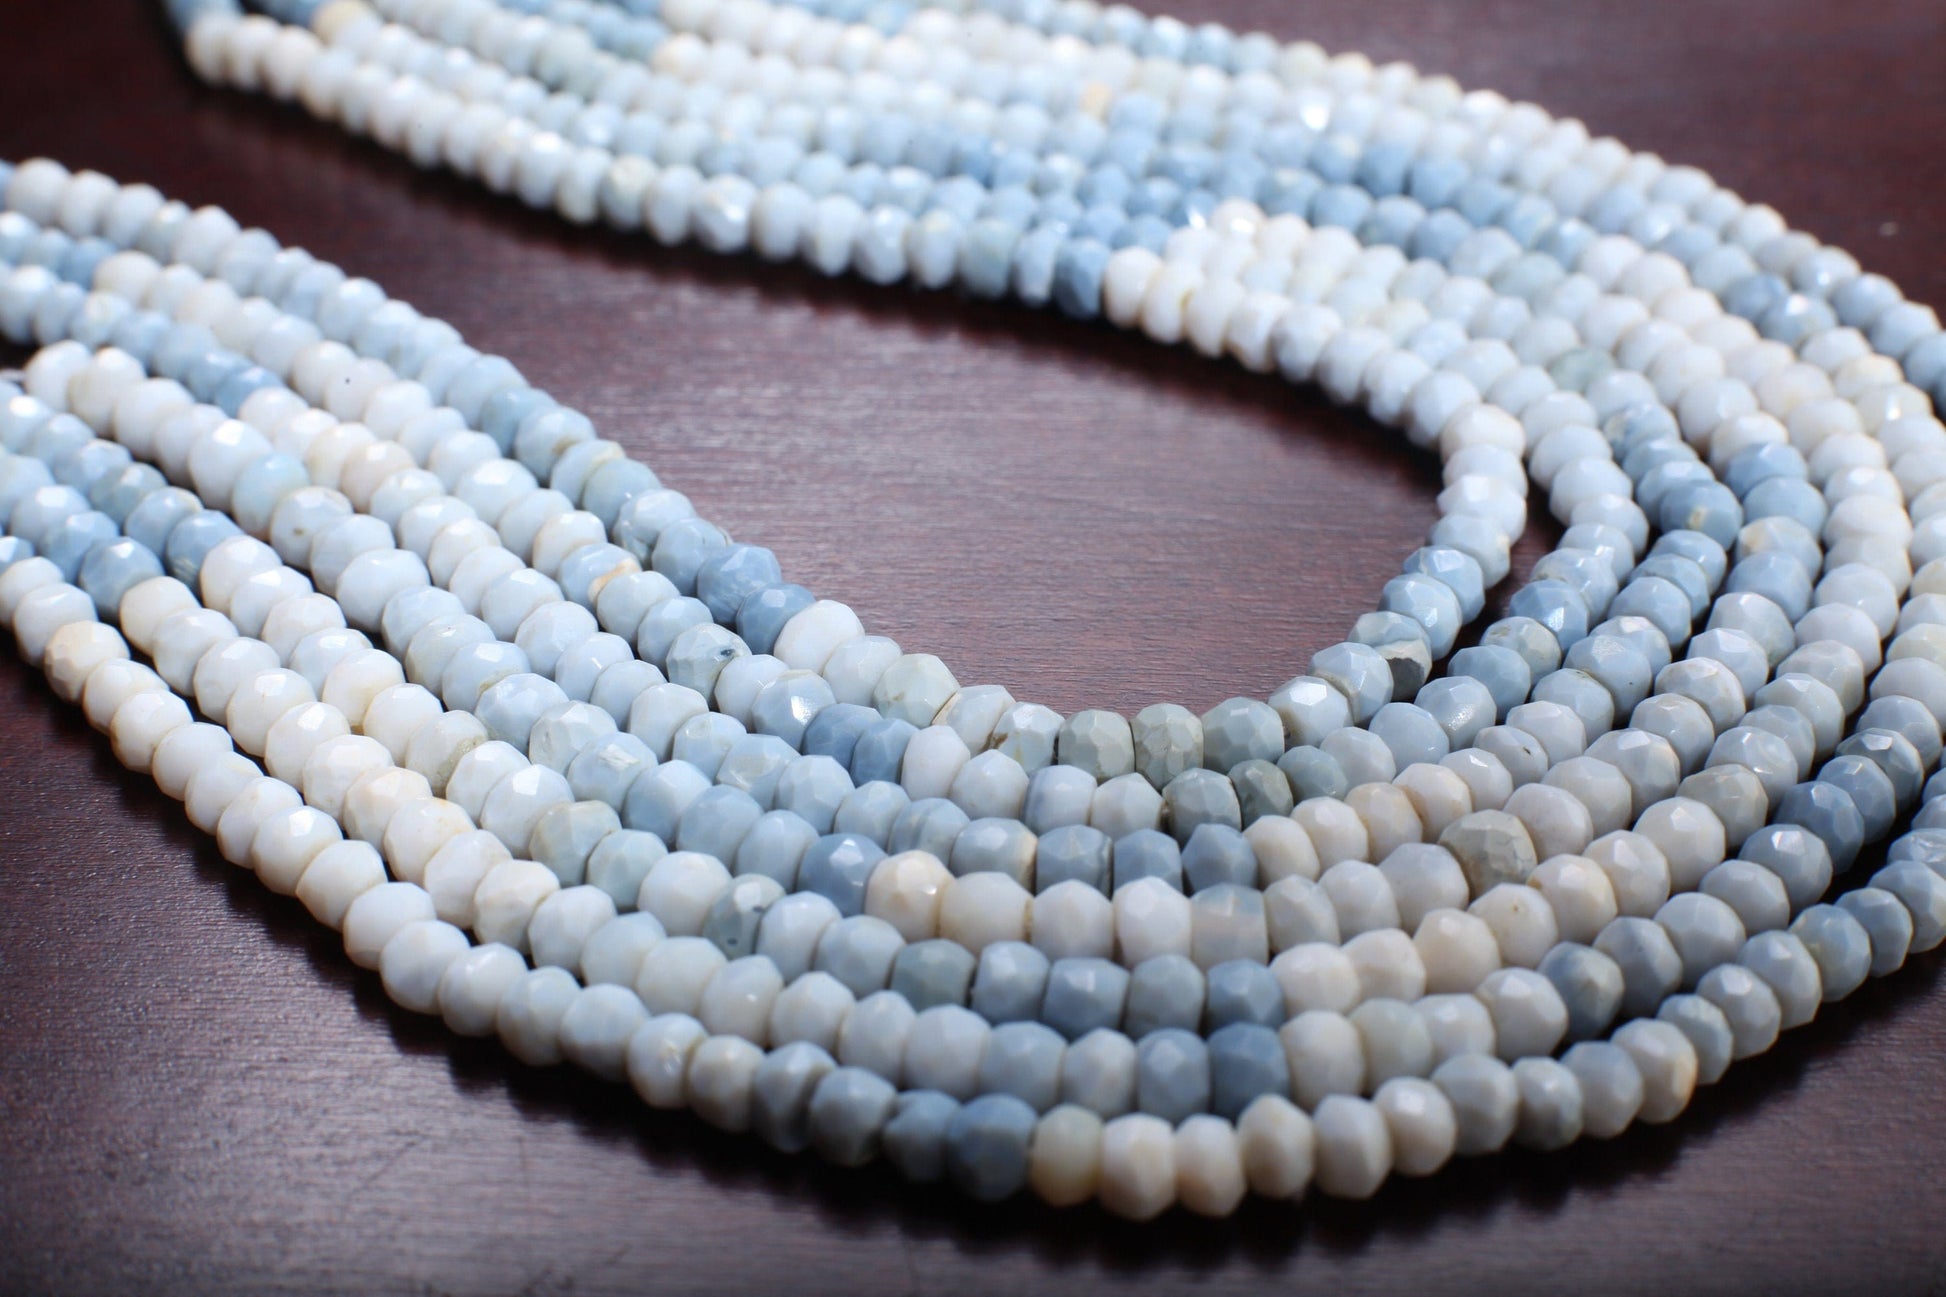 Blue Opal Rondelle, Natural Shaded Peruvian Opal Faceted Roundel 4-5mm Jewelry Making Gemstone Beads 13&quot; Strand, Boulder blue Andean Opal .